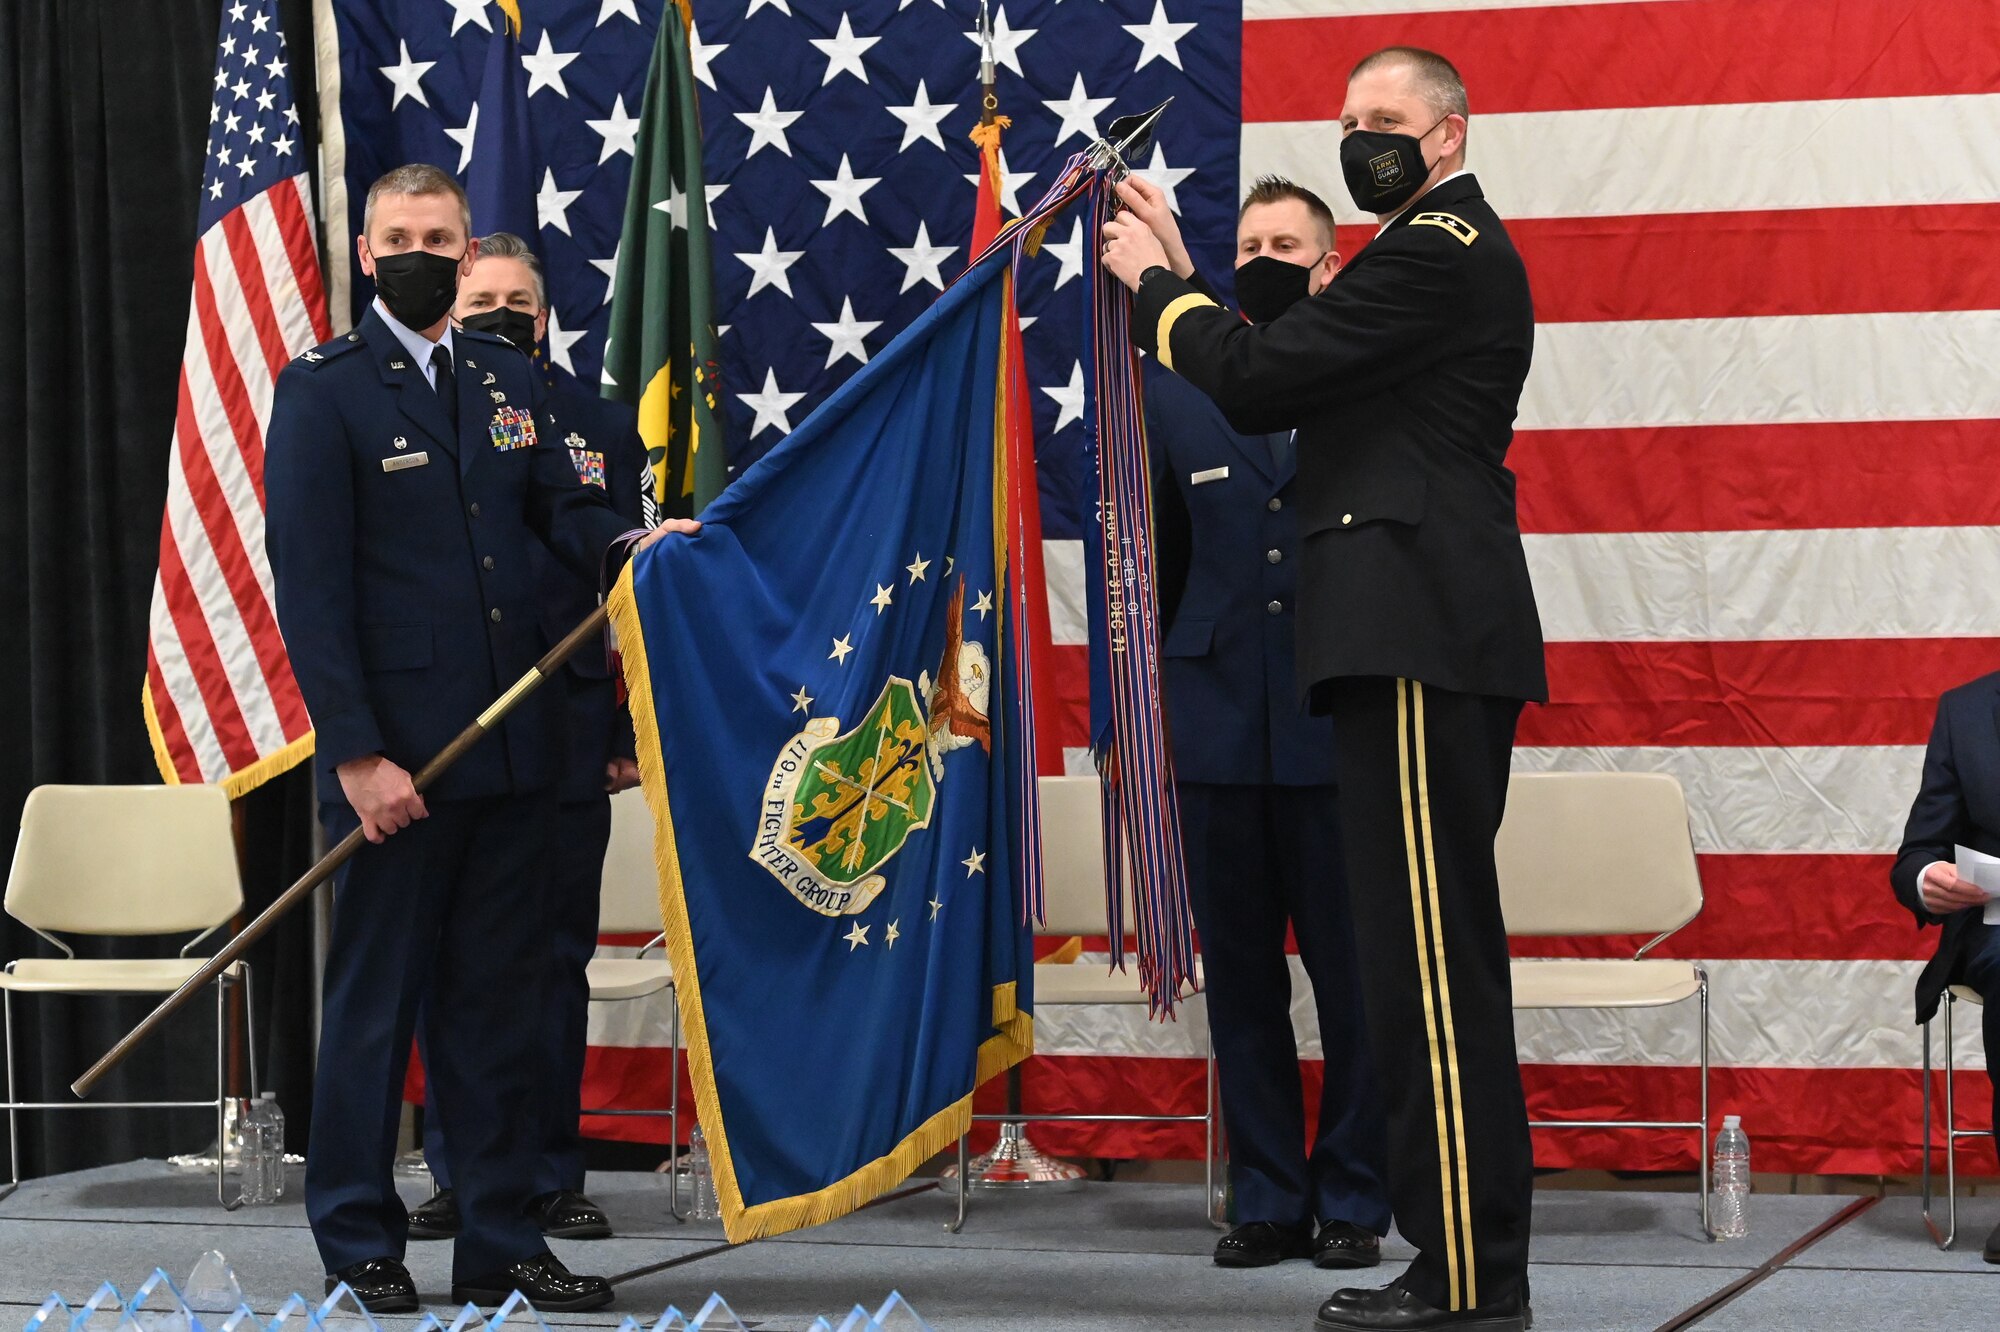 Four military members in uniform stand on a stage in front of a large American flag holding a flag staff to place a symbolic streamer representing the unit accomplishment of earning it's 22nd Air Force Outstanding Unit Award at the North Dakota Air National Guard Base, Fargo, N.D., March 6, 2021.